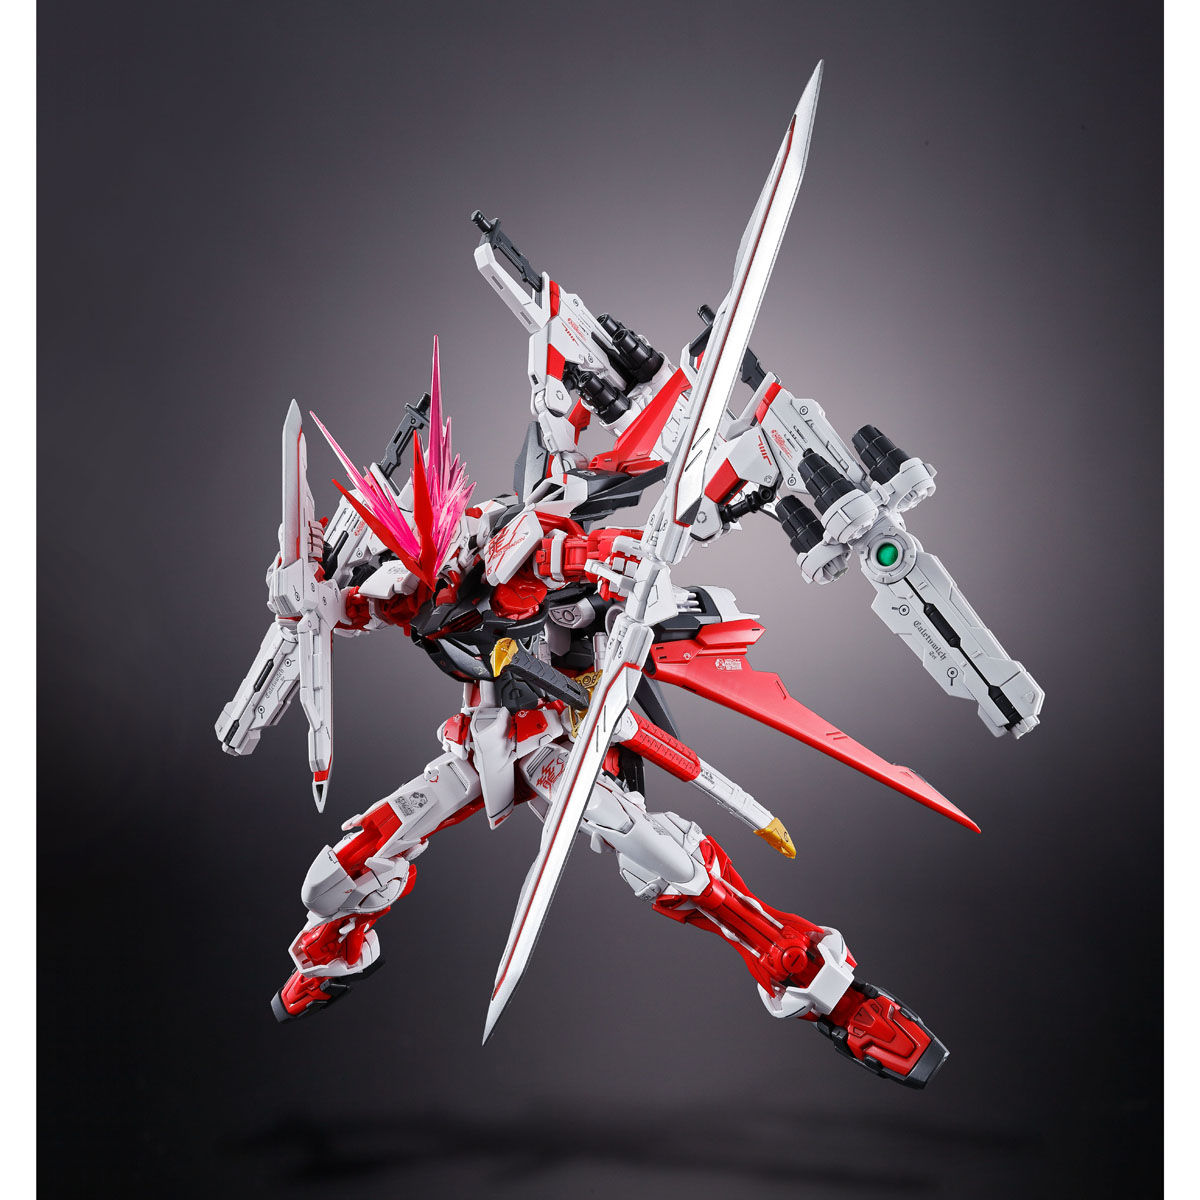 P-Bandai: MG 1/100 Astray Red Dragon [REISSUE] - Info